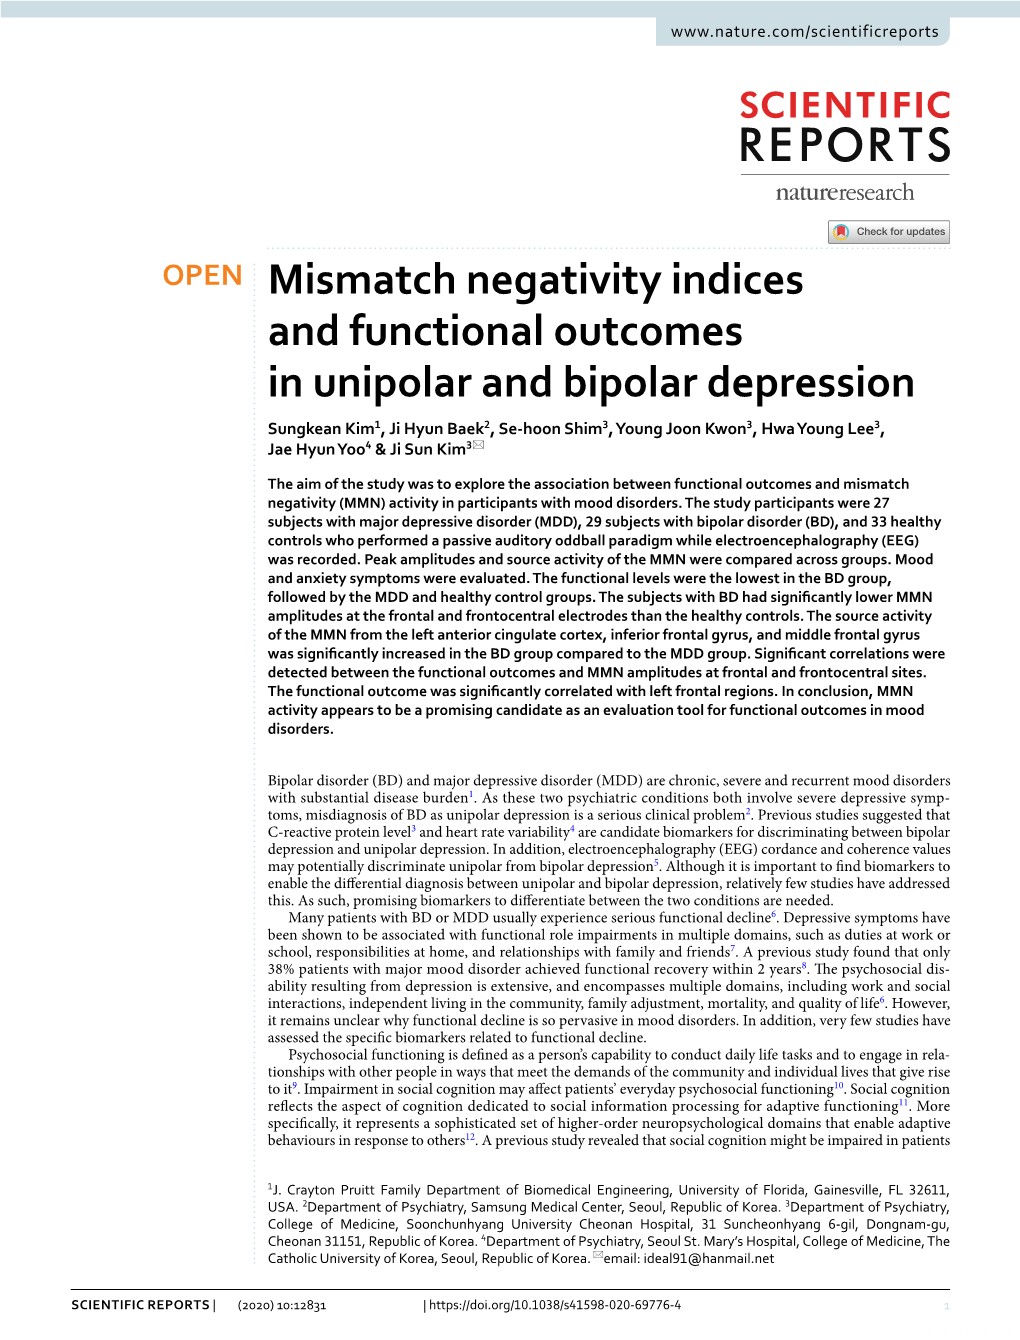 Mismatch Negativity Indices and Functional Outcomes in Unipolar And